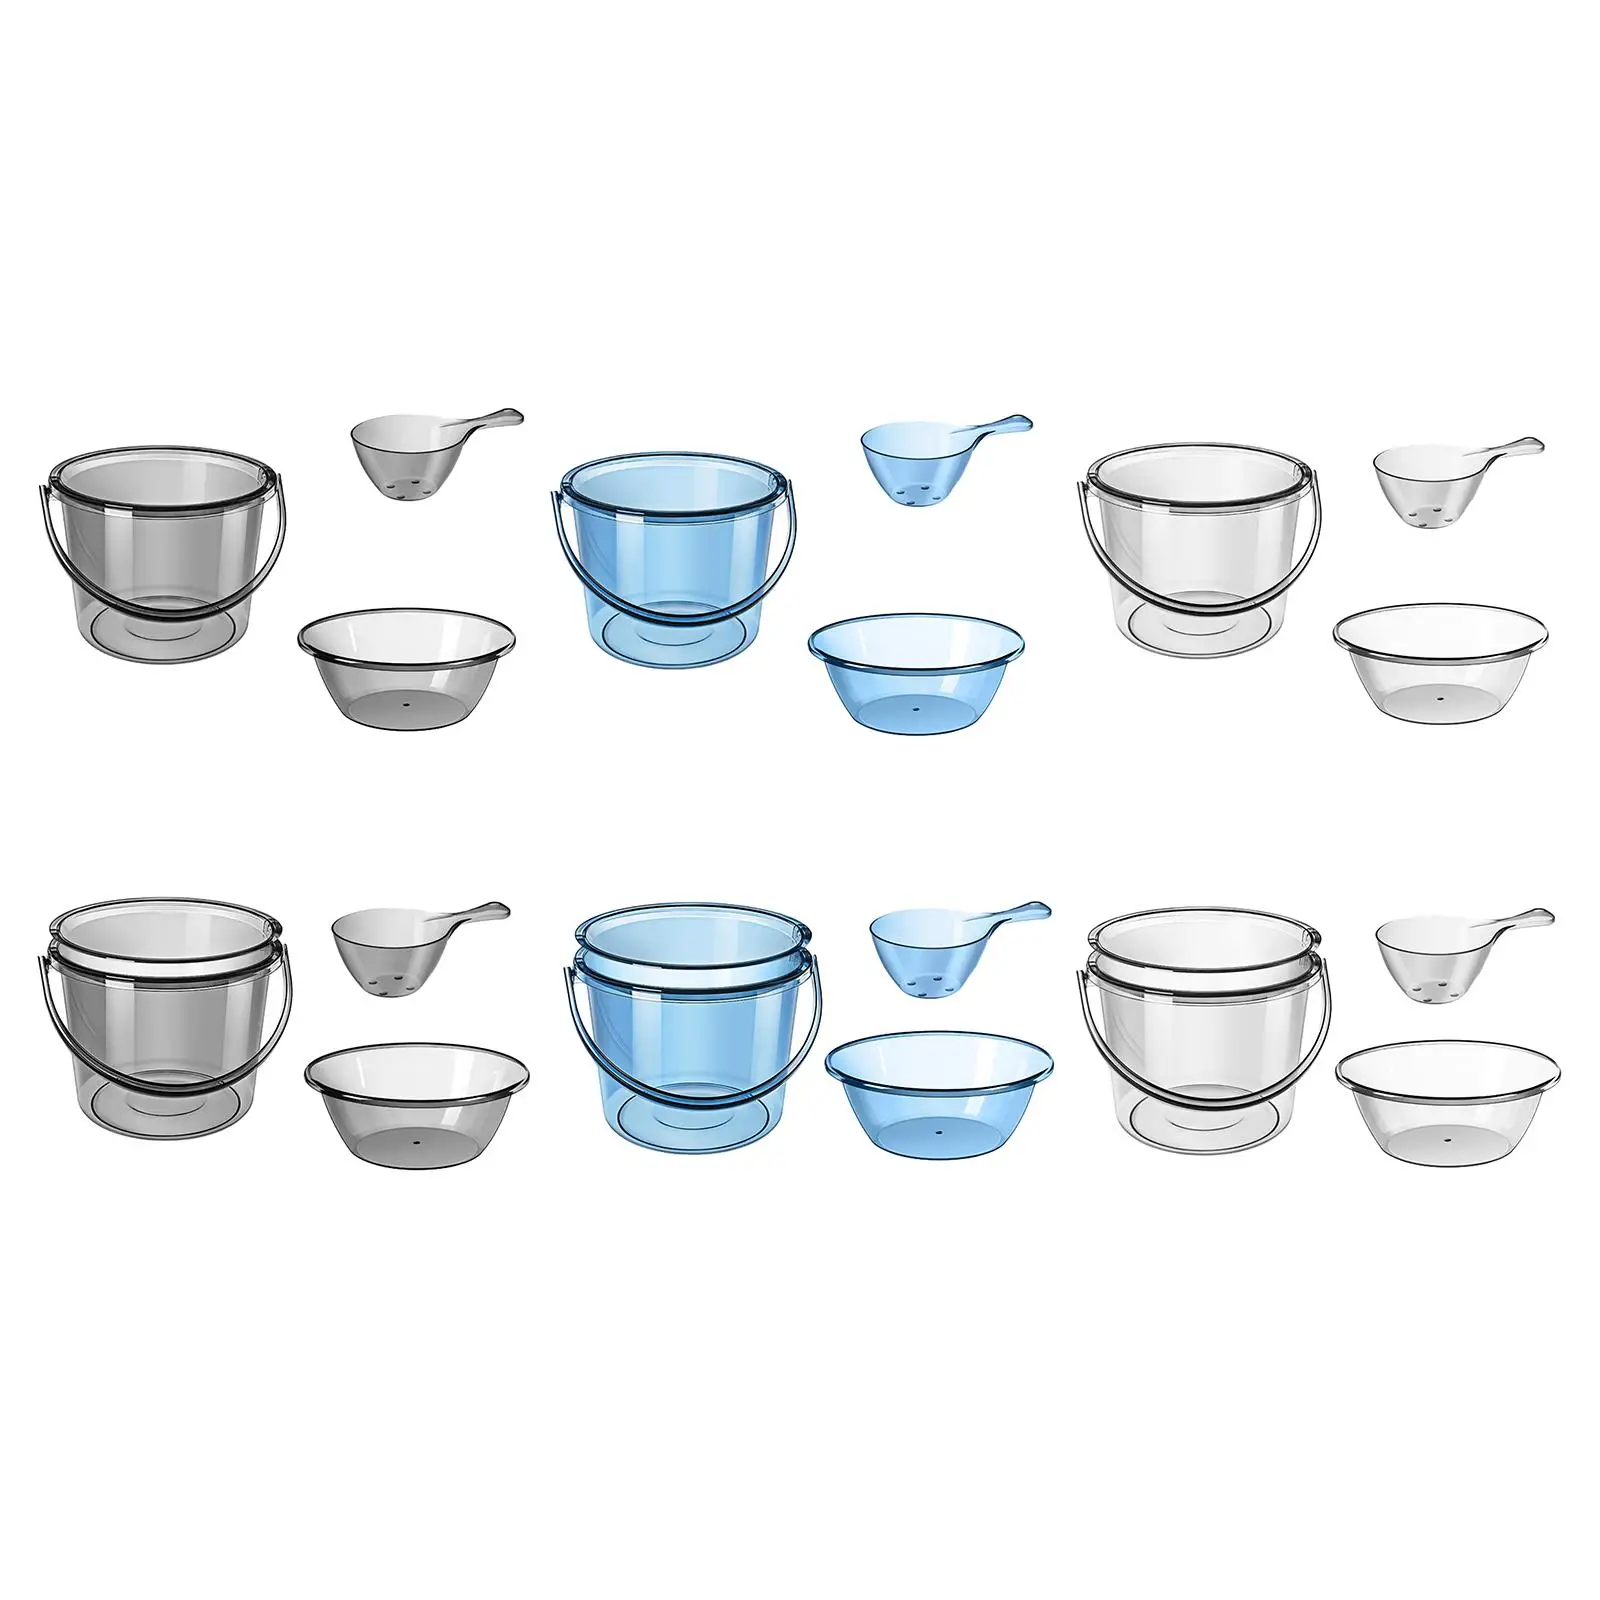 Water Bucket Set Water Pail with Basin and Spoon Bathing Household Bucket for Car Washing Outdoor Dormitory Kitchen Garden